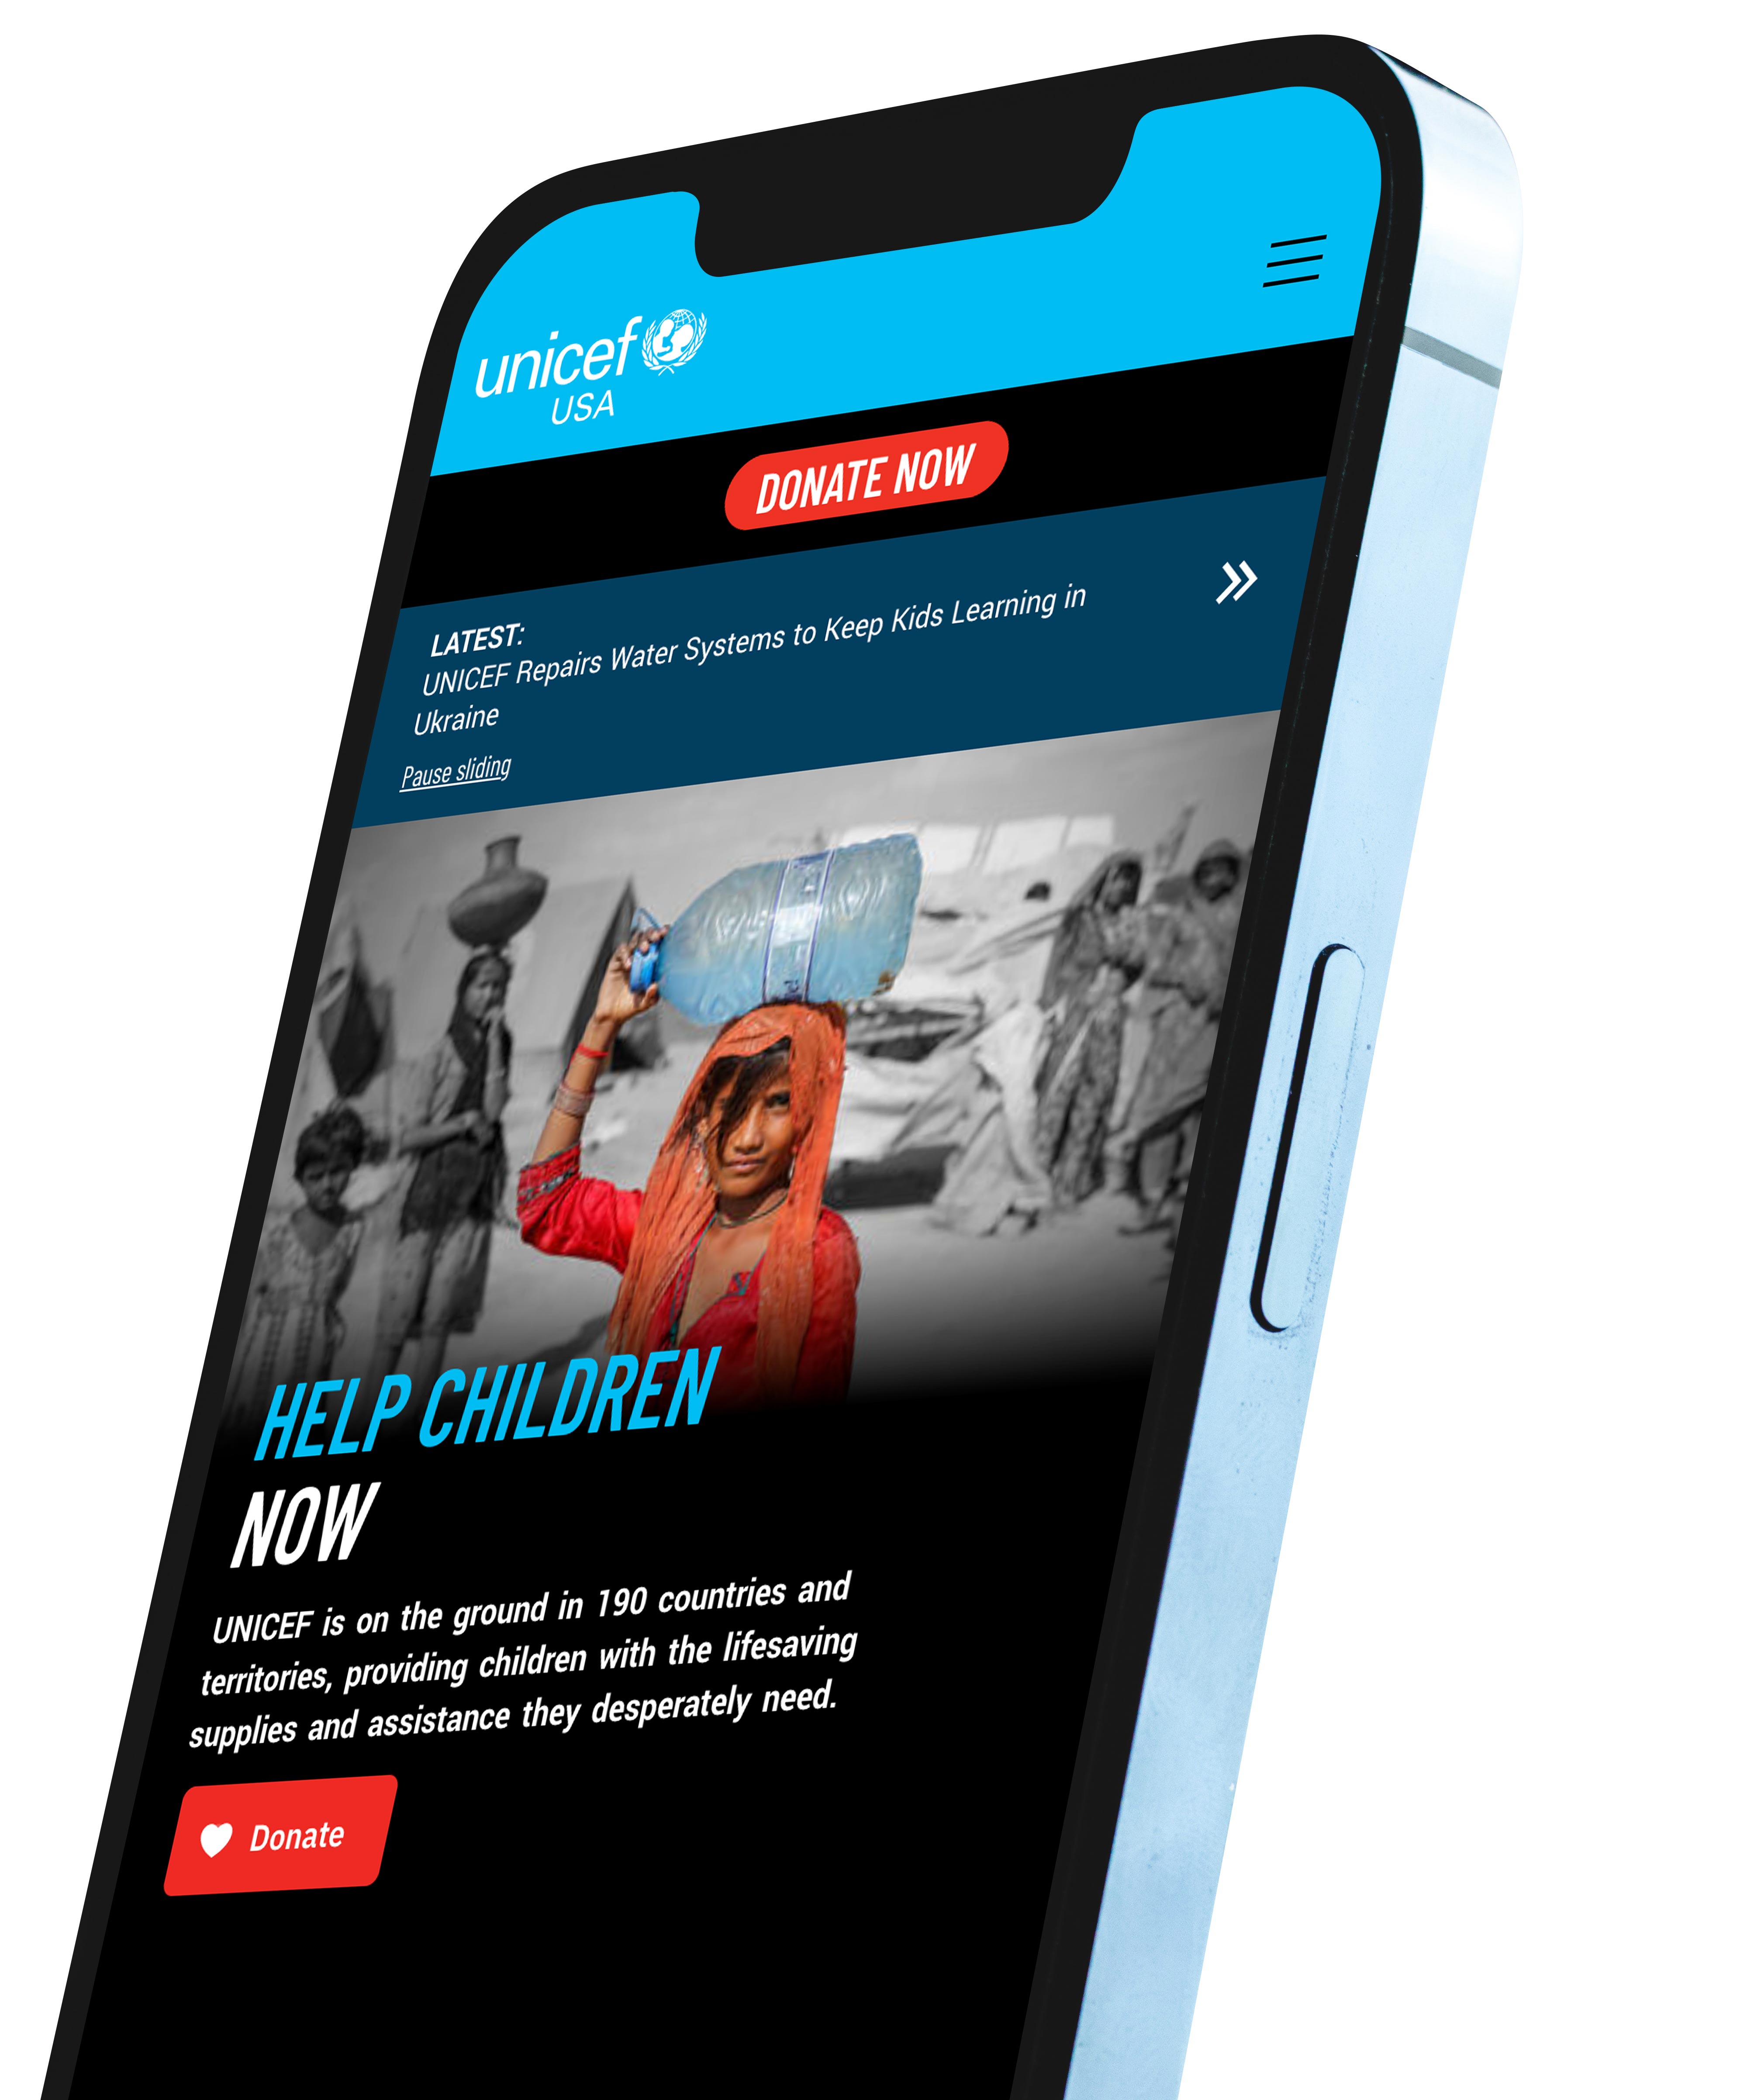 The UNICEF USA homepage on a mobile phone.